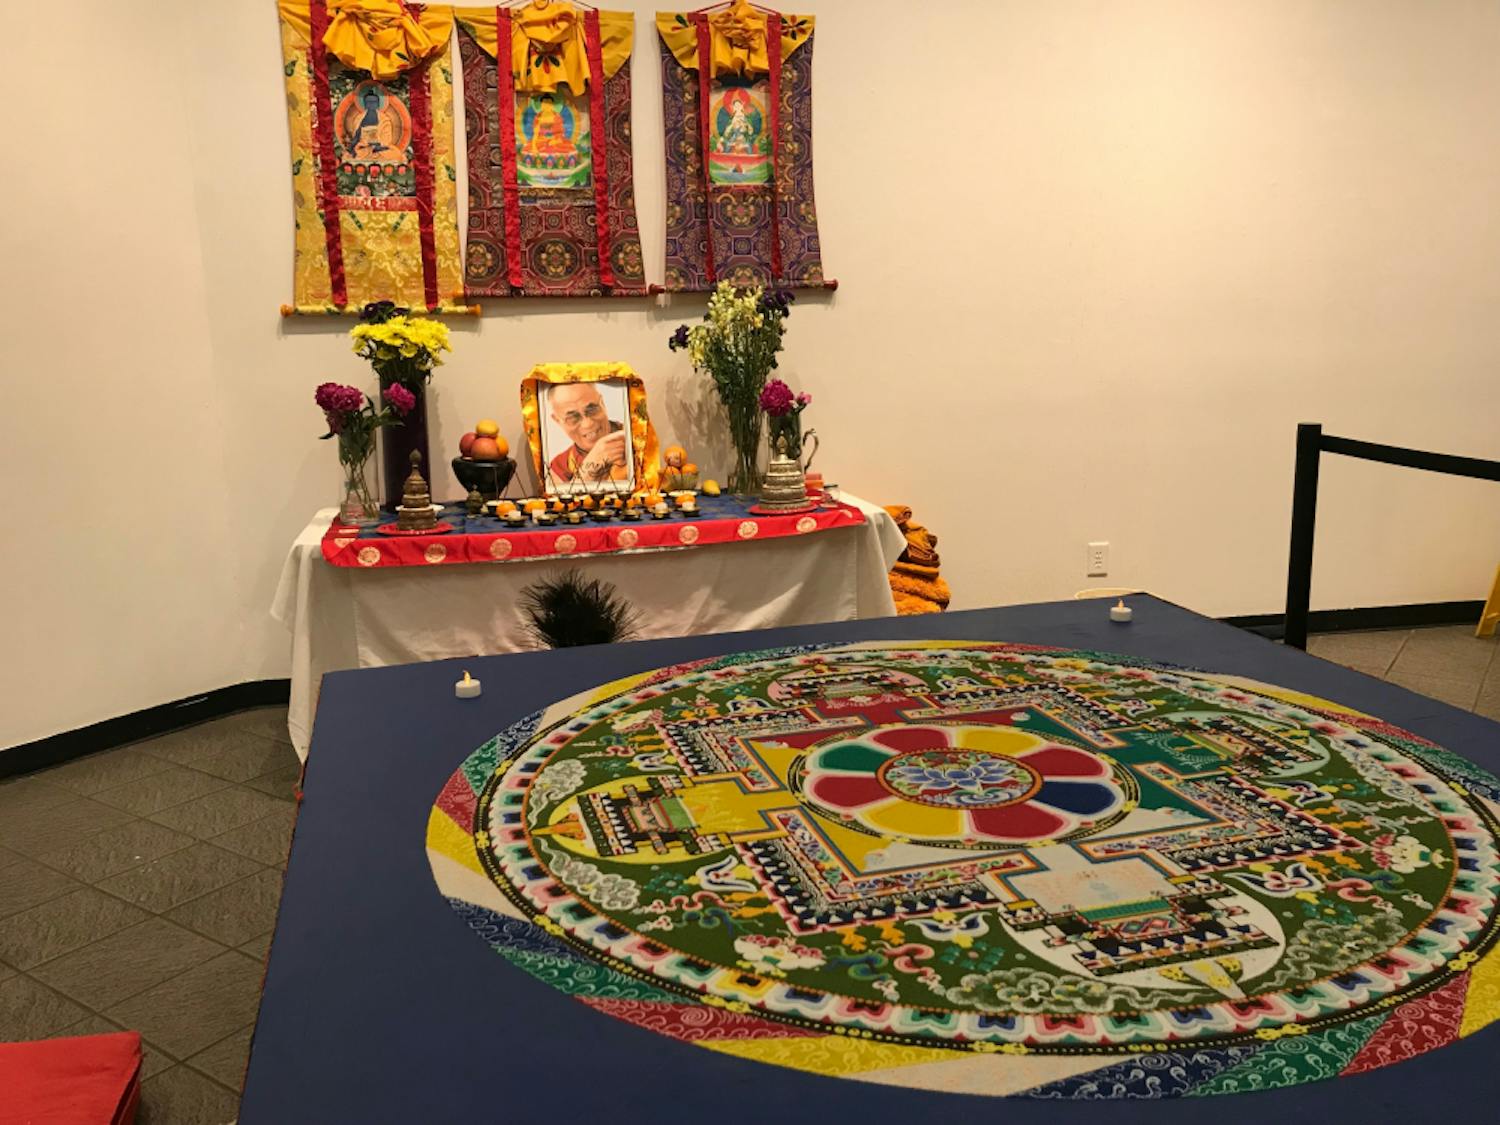 A sand mandala was constructed by Tibetan monks across five days starting May 15 as part of the Sacred Arts tour.